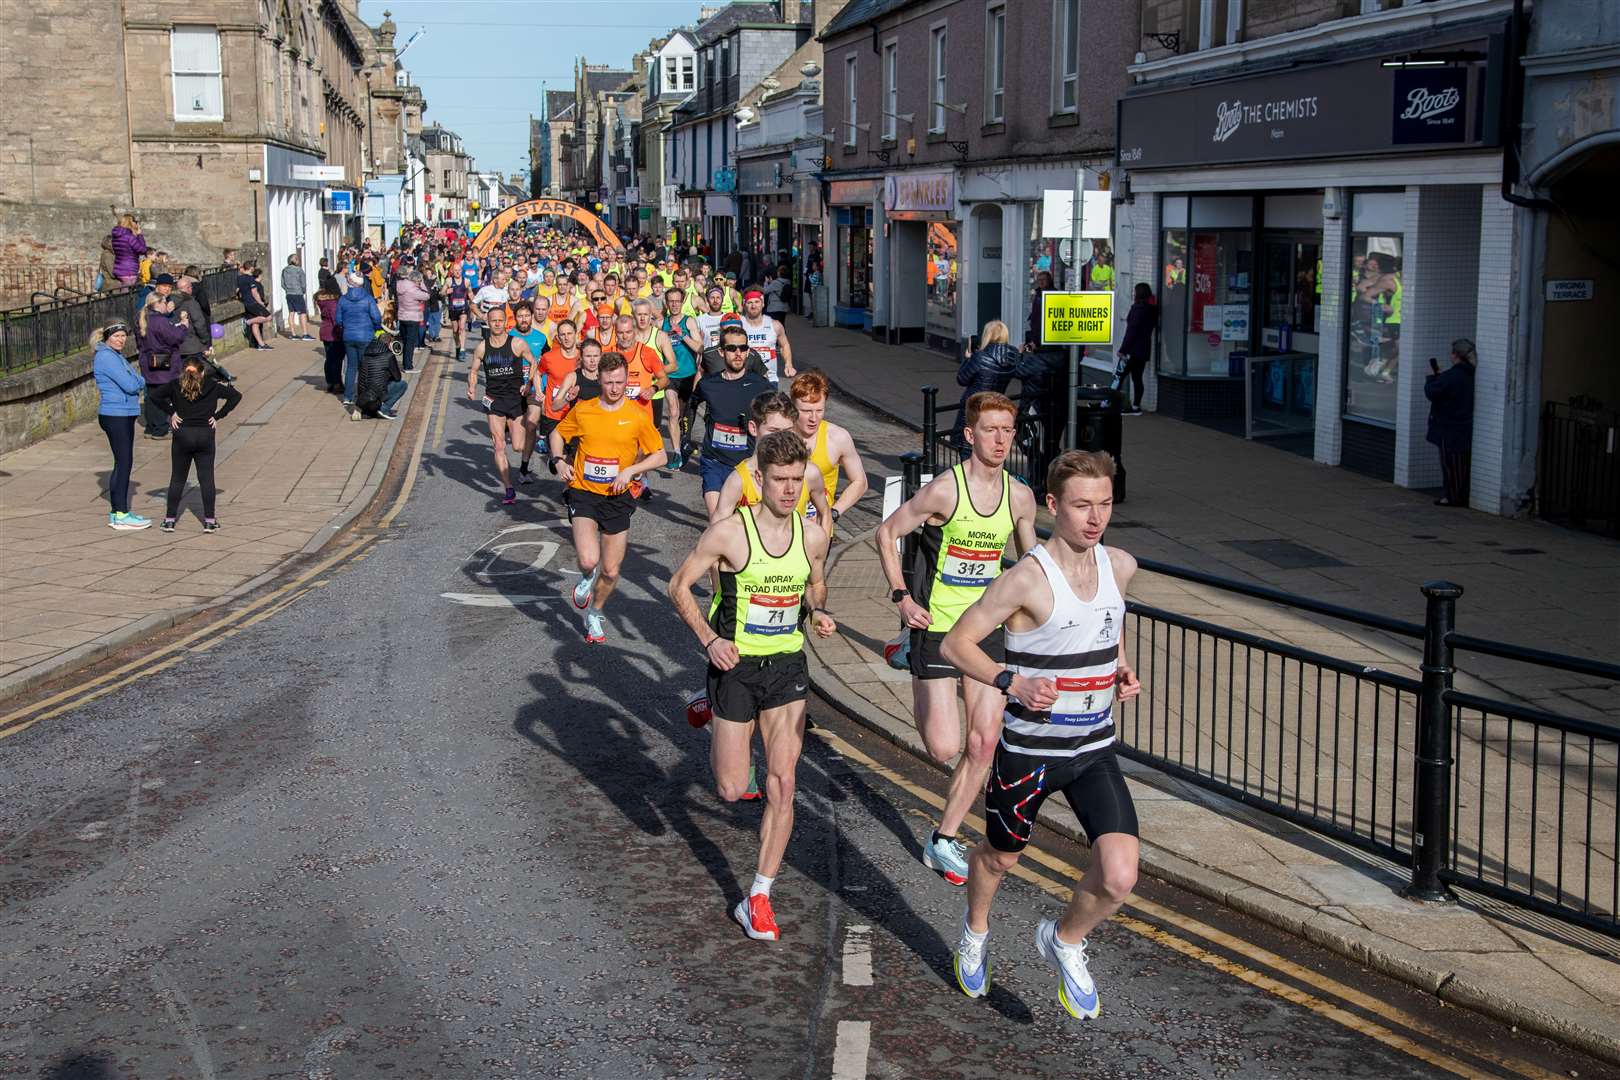 Athletes running through the town centre in Nairn. Picture: Daniel Forsyth